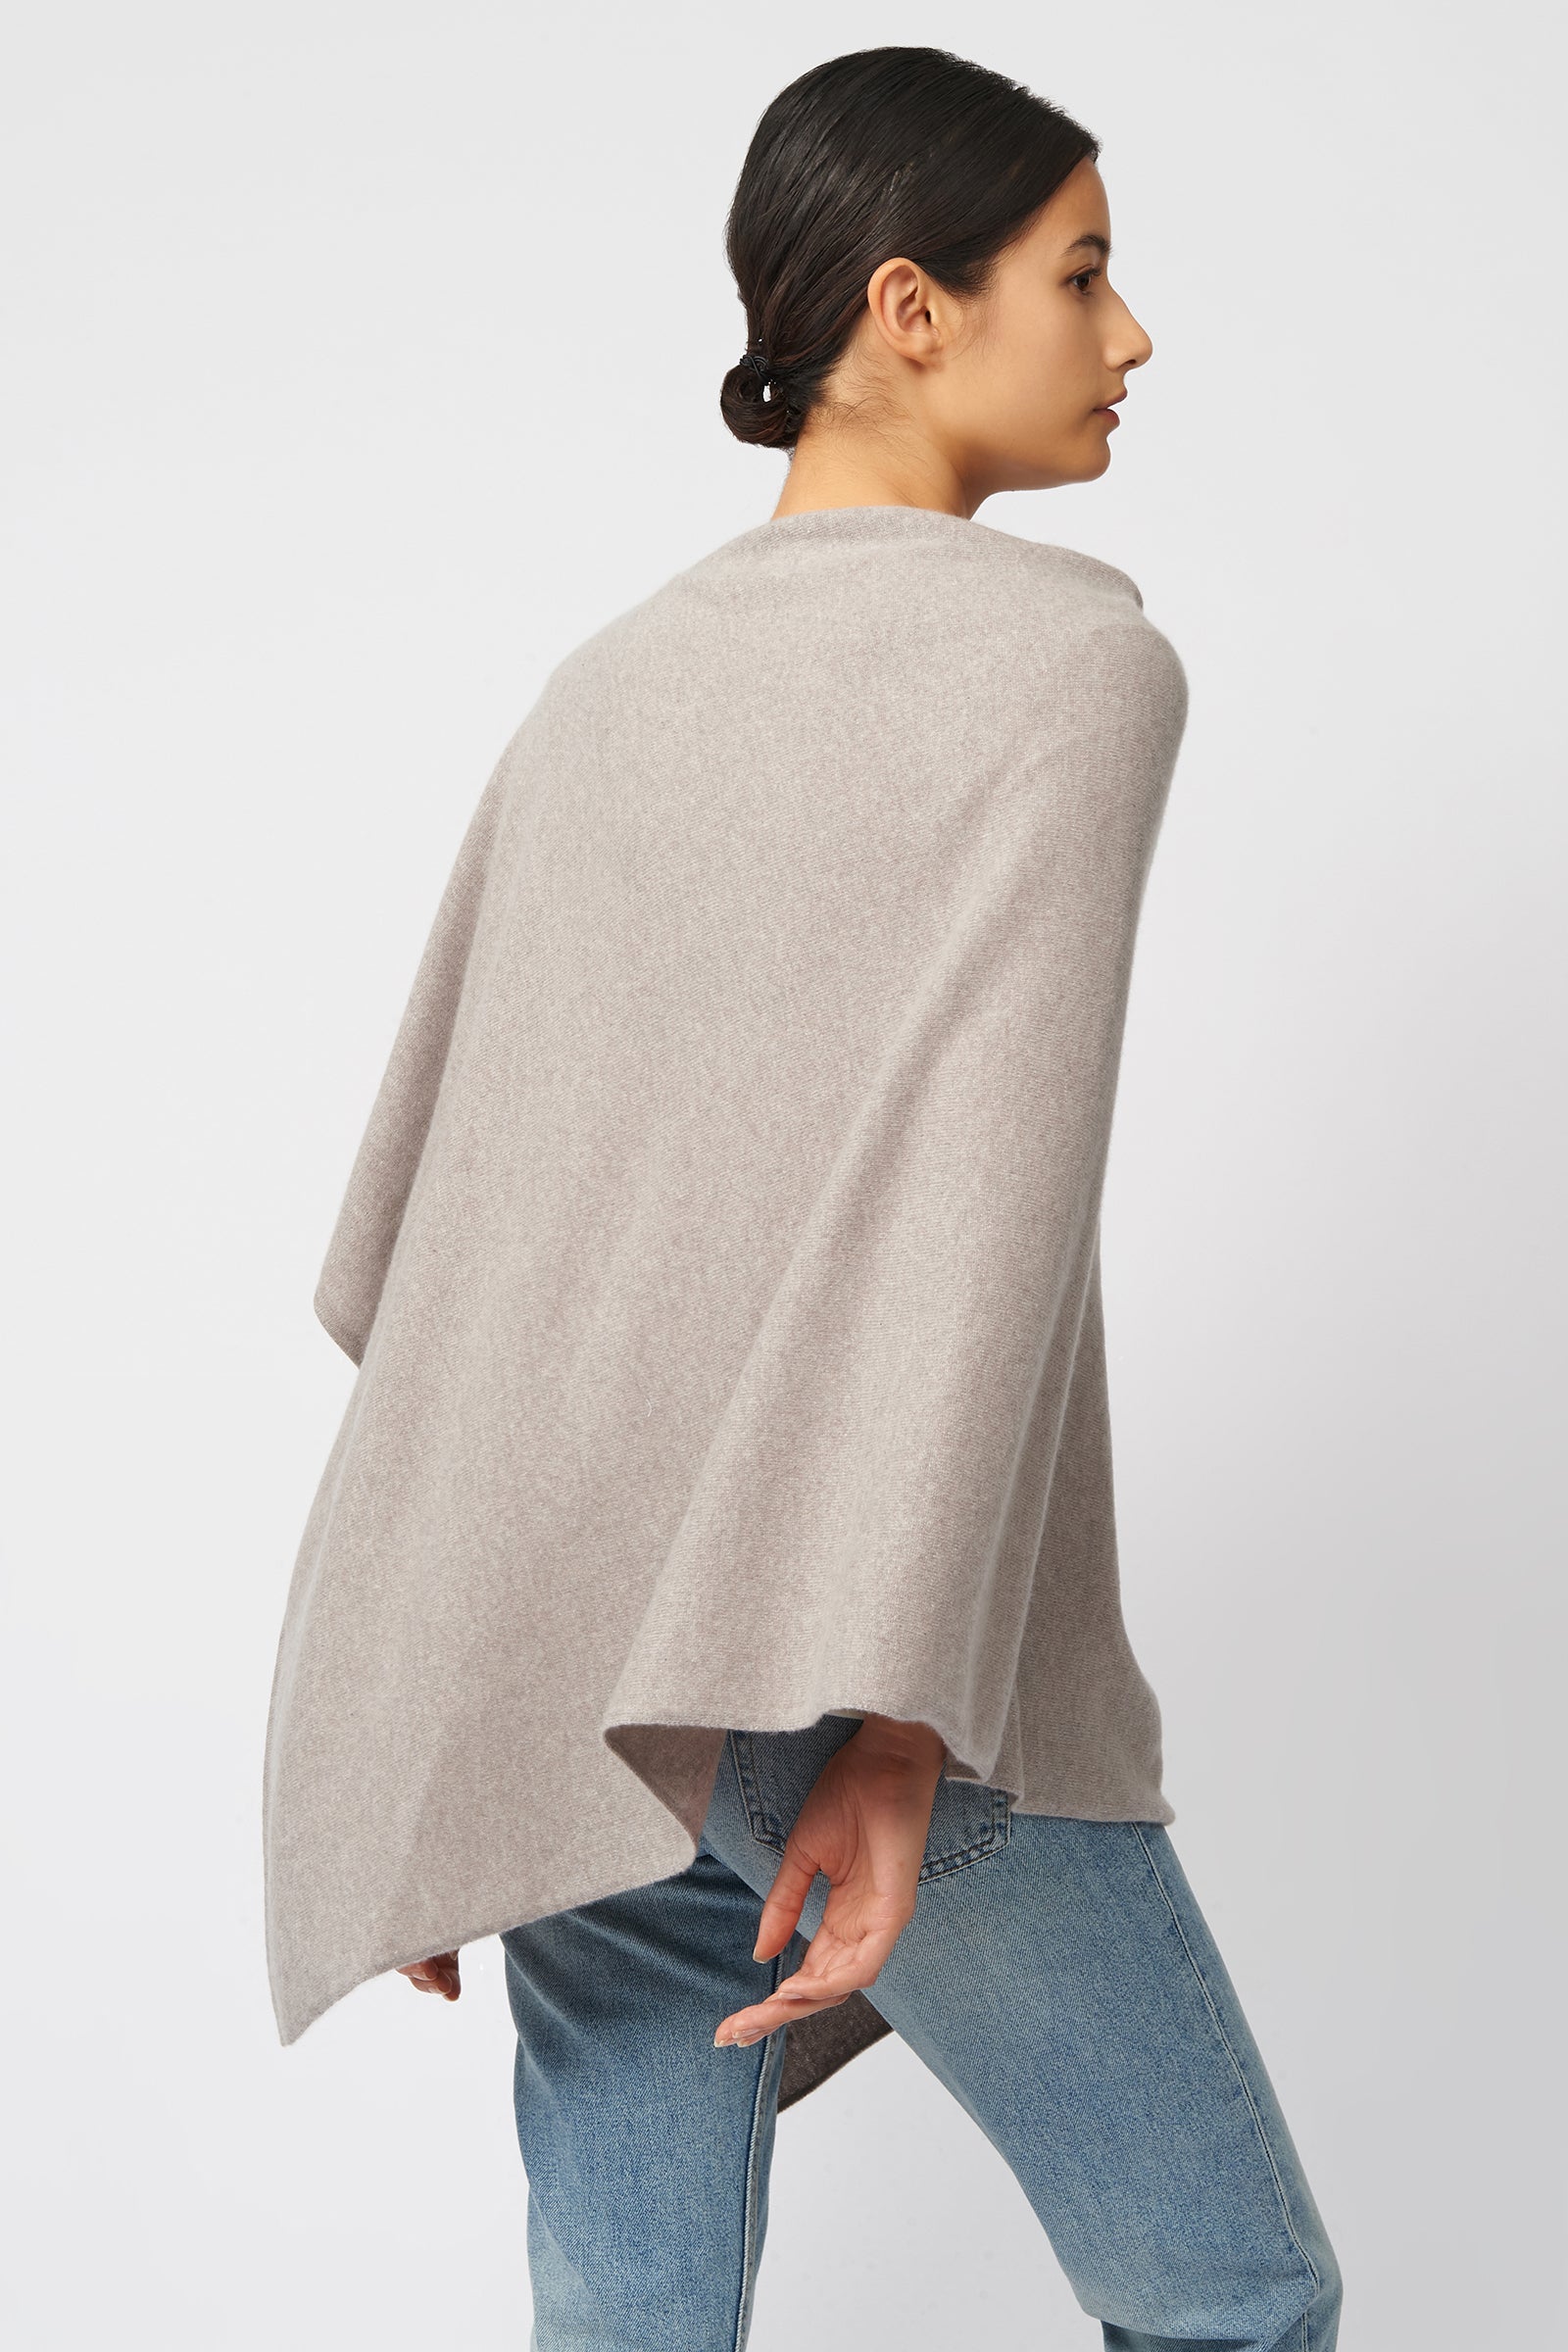 Kal Rieman Cashmere Poncho in Drift on Model Back View